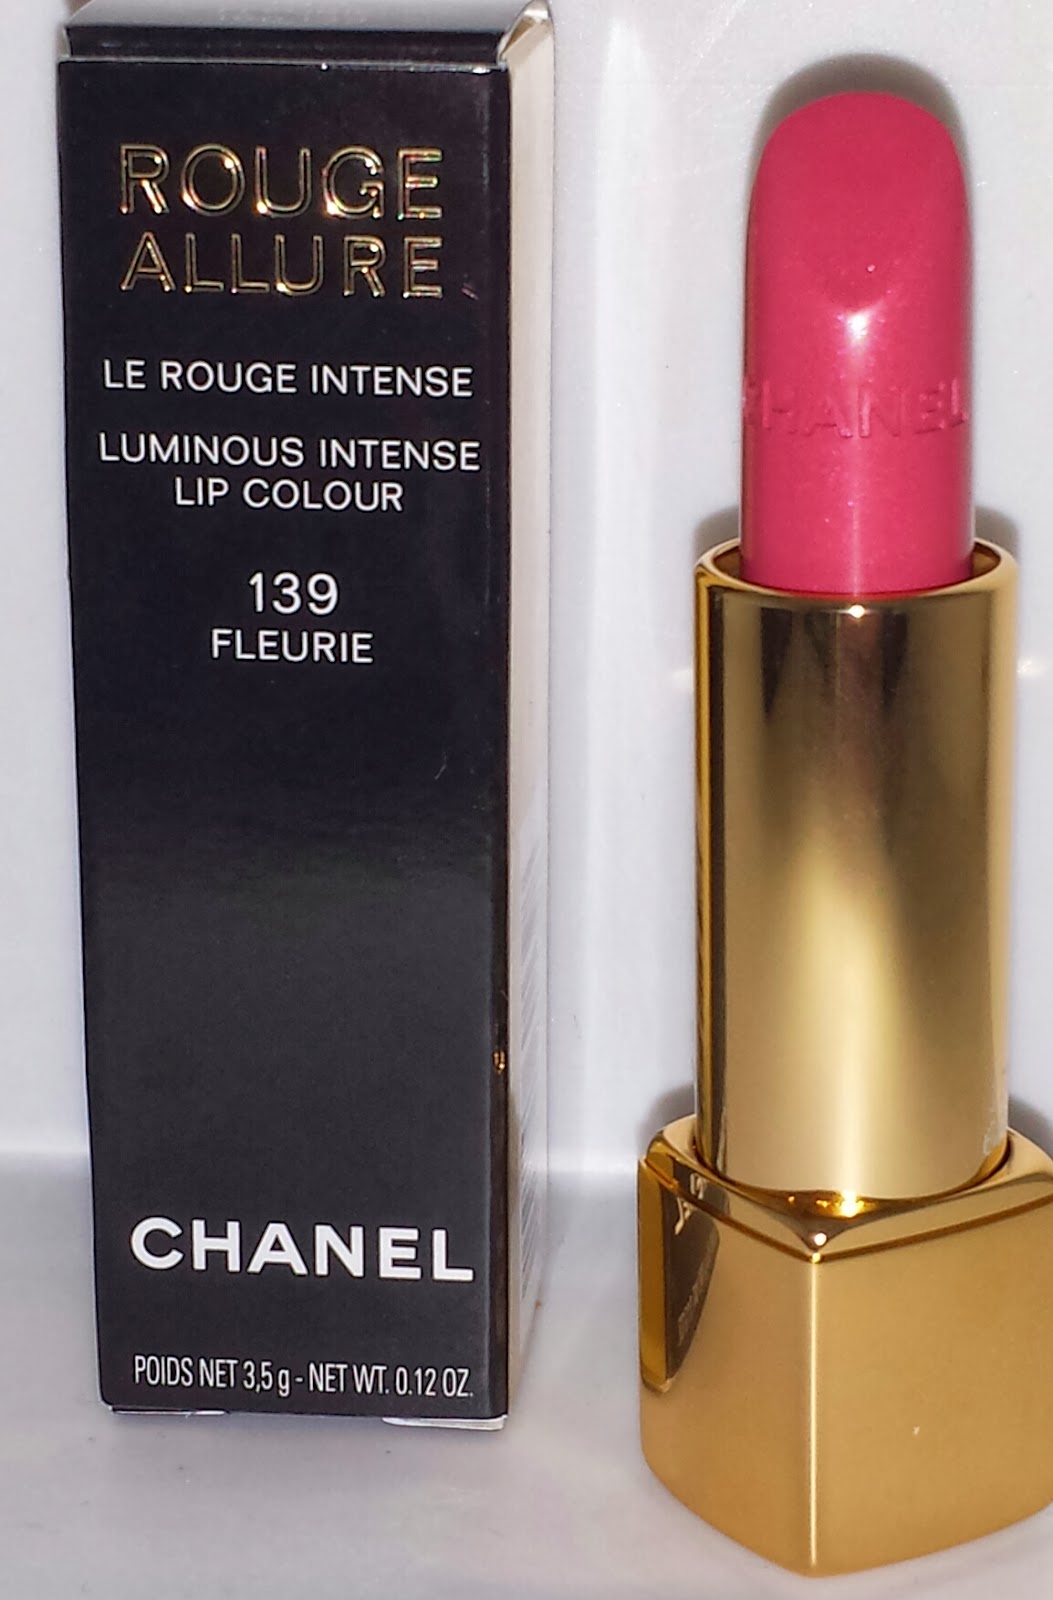 Jayded Dreaming Beauty Blog : 139 FLEURIE CHANEL ROUGE ALLURE LUMINOUS INTENSE  LIP COLOUR - SWATCHES AND REVIEW